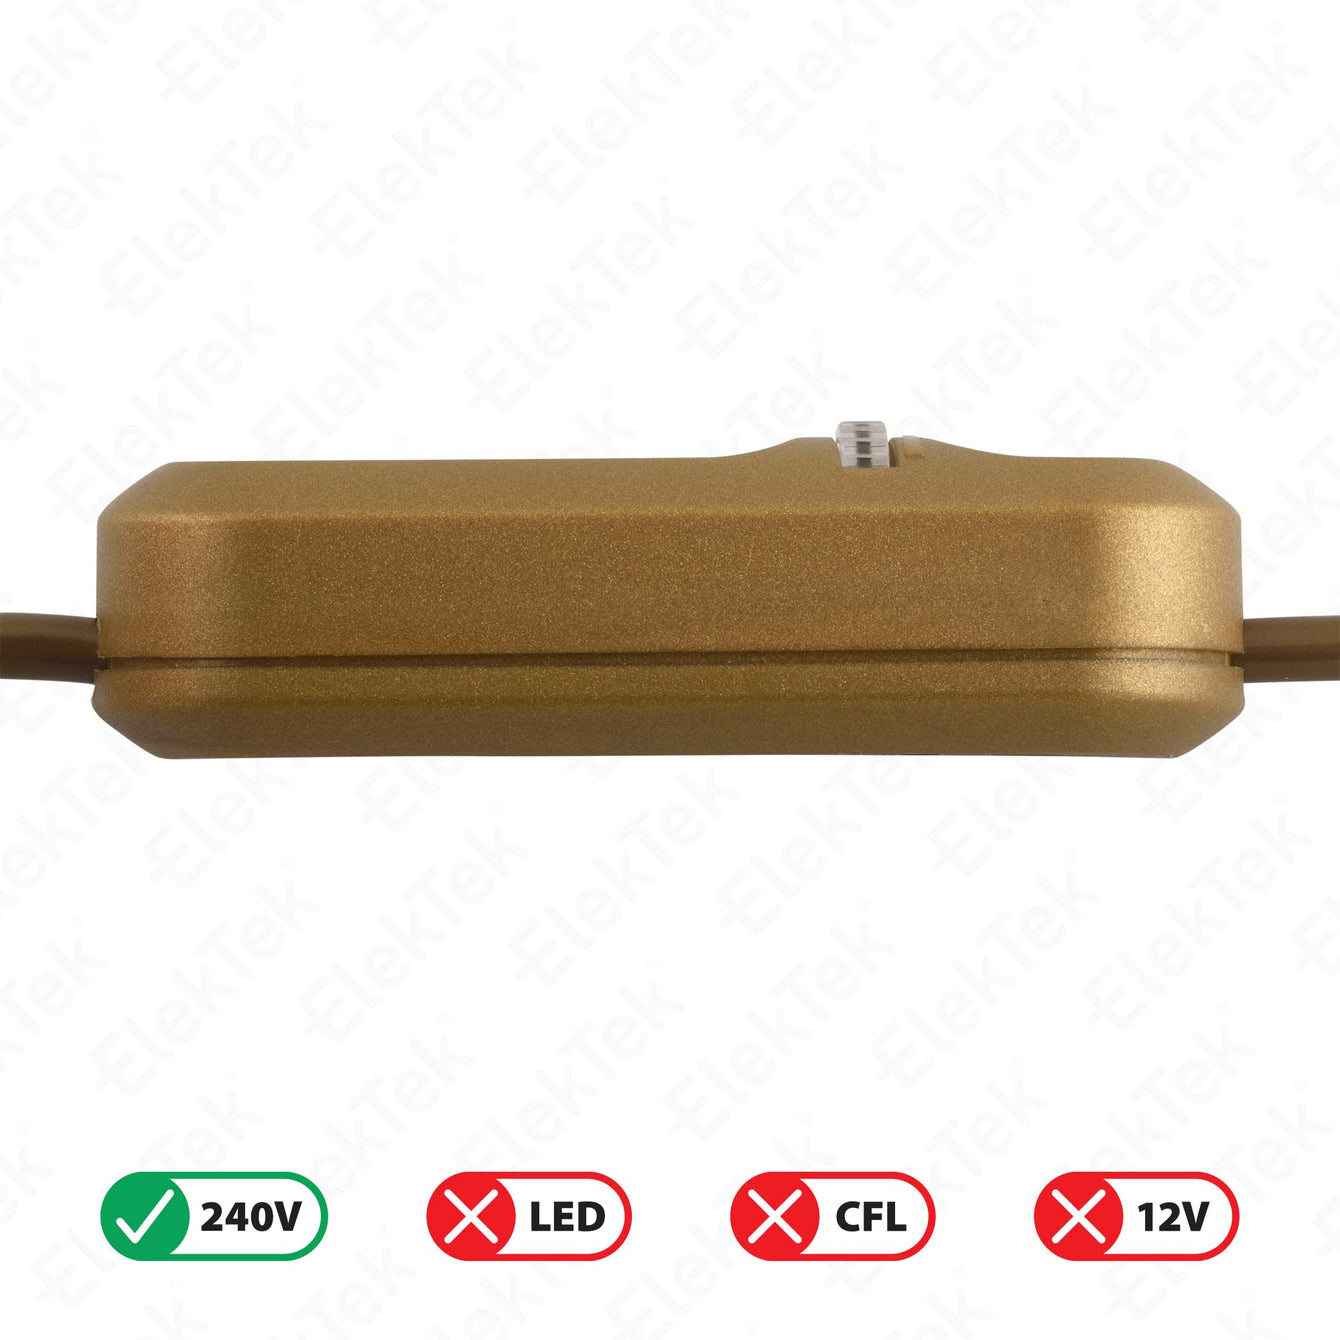 ElekTek In Line Rotary Dimmer Switch Rated 20-160w 240v AC 3 Core Suitable For Incandescent Lamps and Bulbs Colours Gold